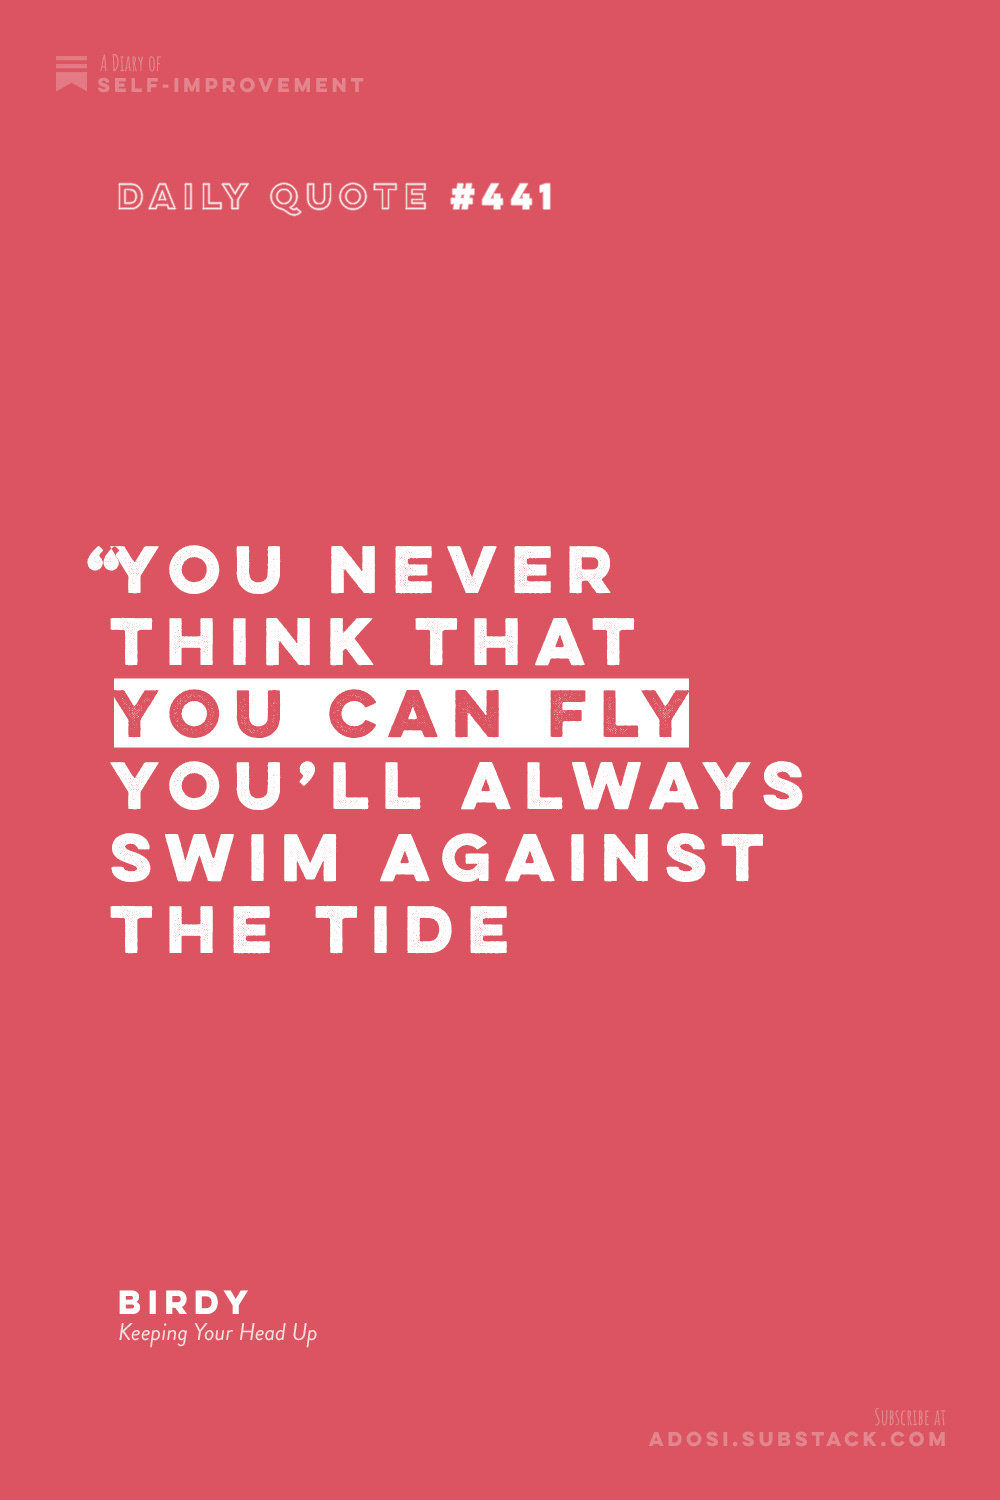 Daily Quote #441: "You never think that you can fly, you’ll always swim against the tide” Birdy, Keeping Your Head Up